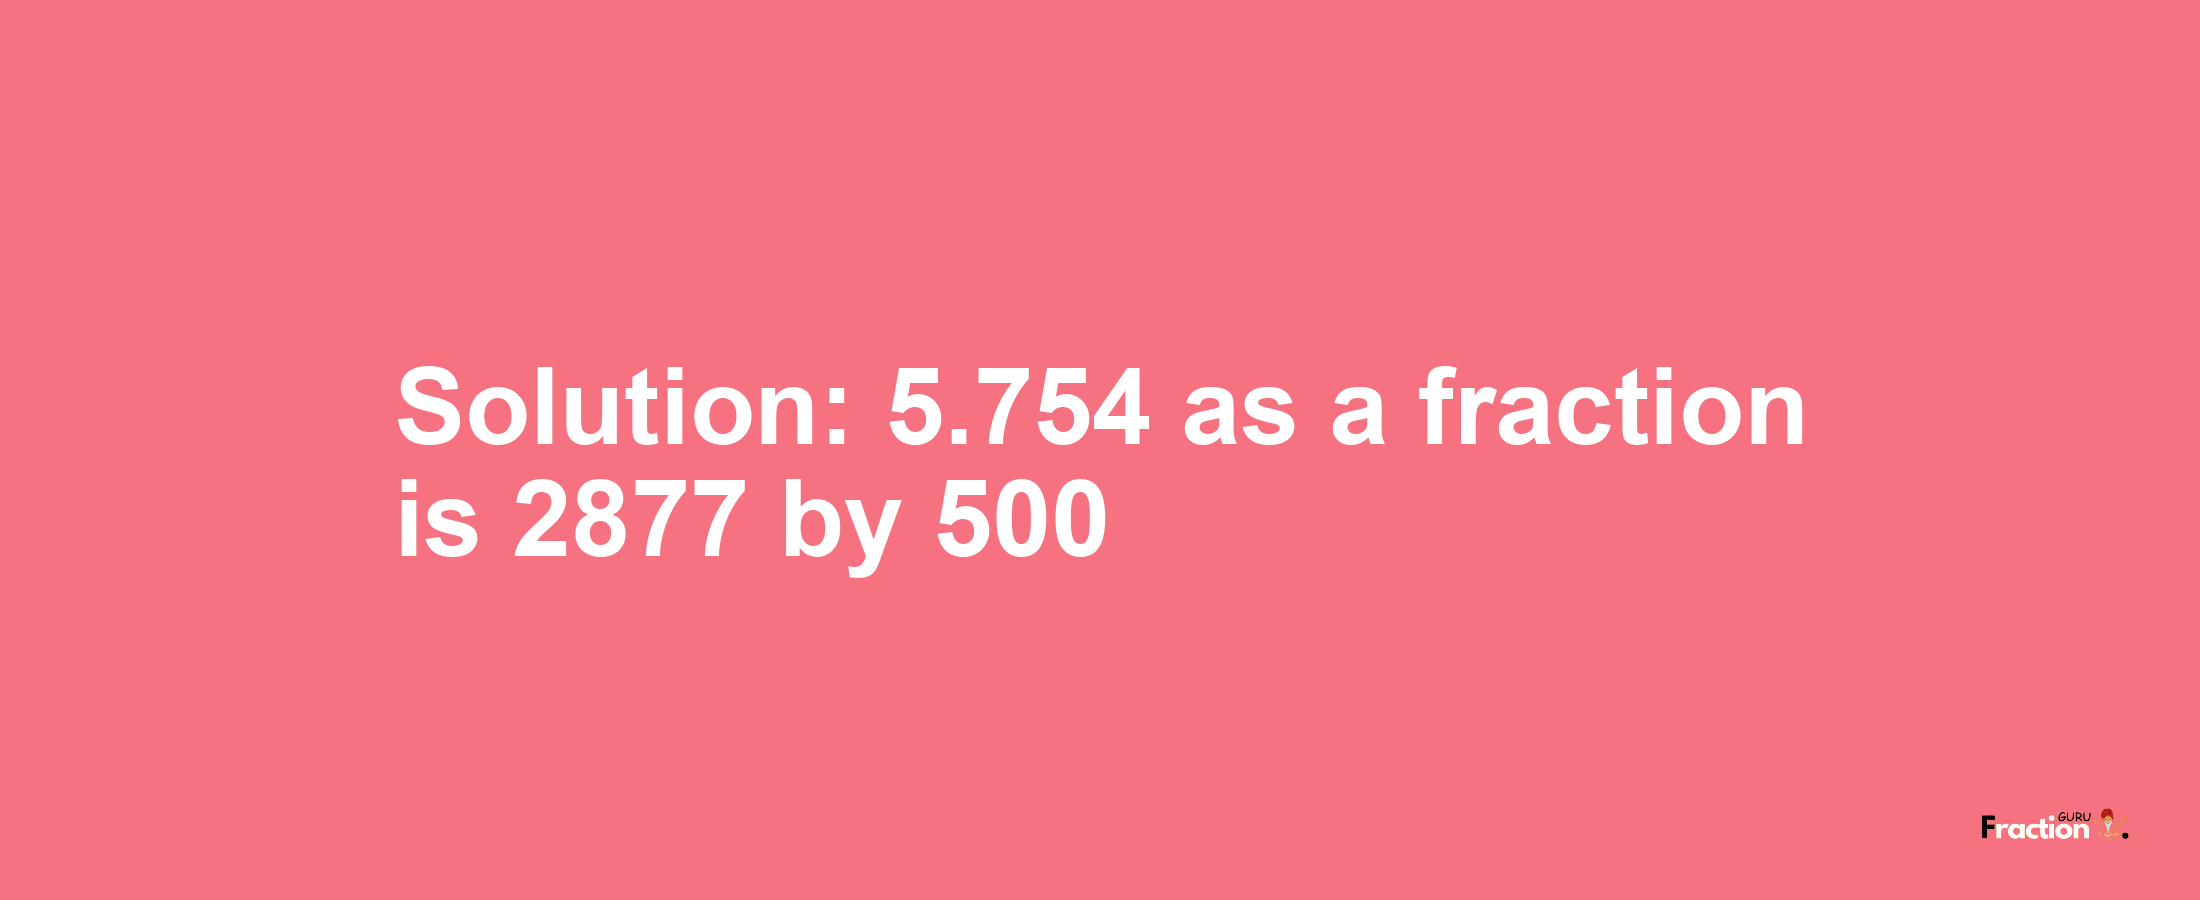 Solution:5.754 as a fraction is 2877/500